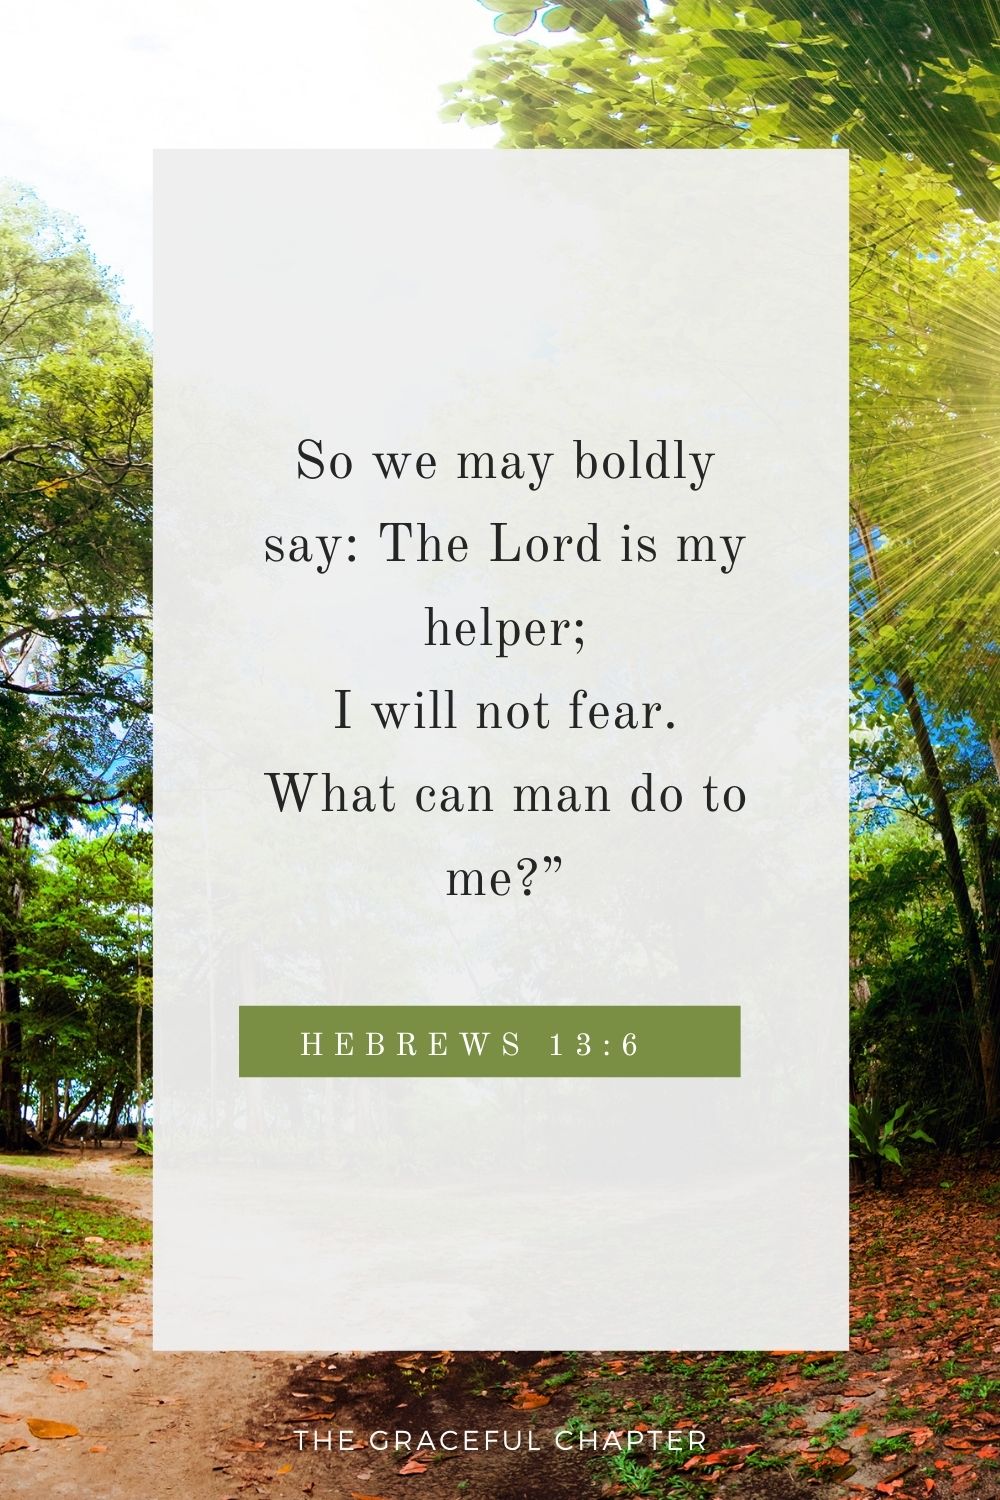 So we may boldly say: The Lord is my helper; I will not fear. What can man do to me?” Hebrews 13:6